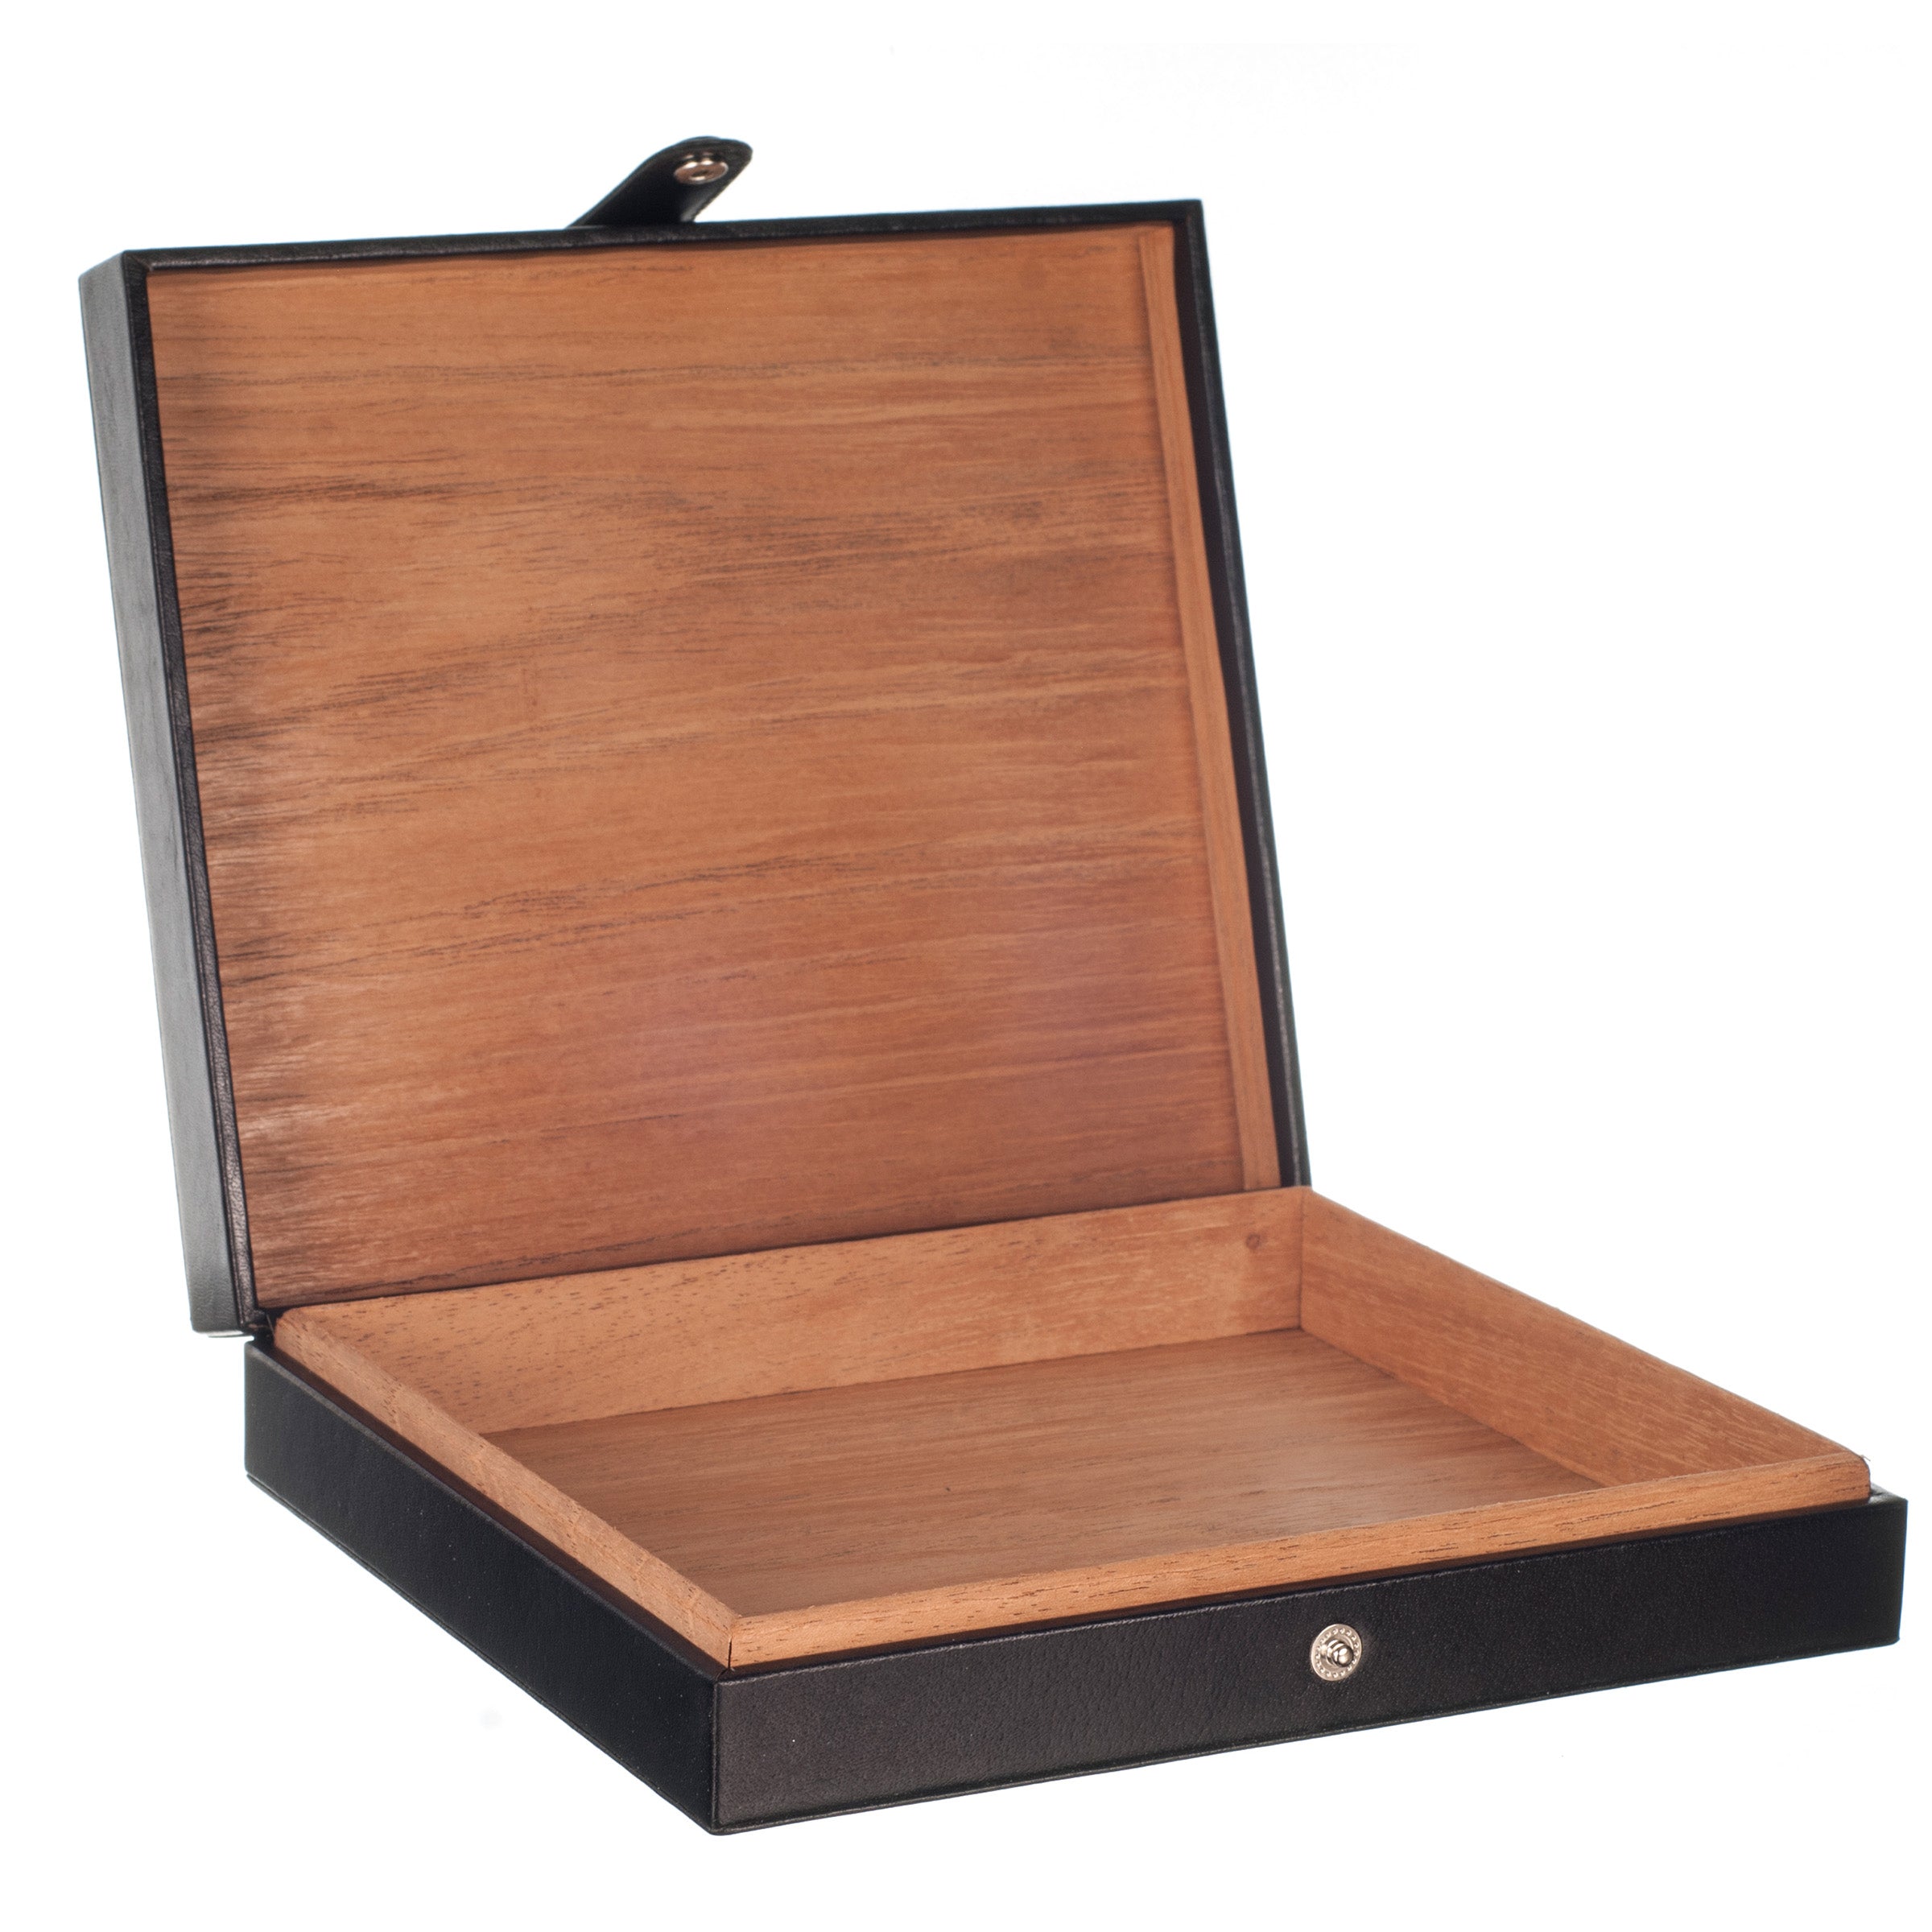 Leather Bound 15 Cigar Travel Humidor